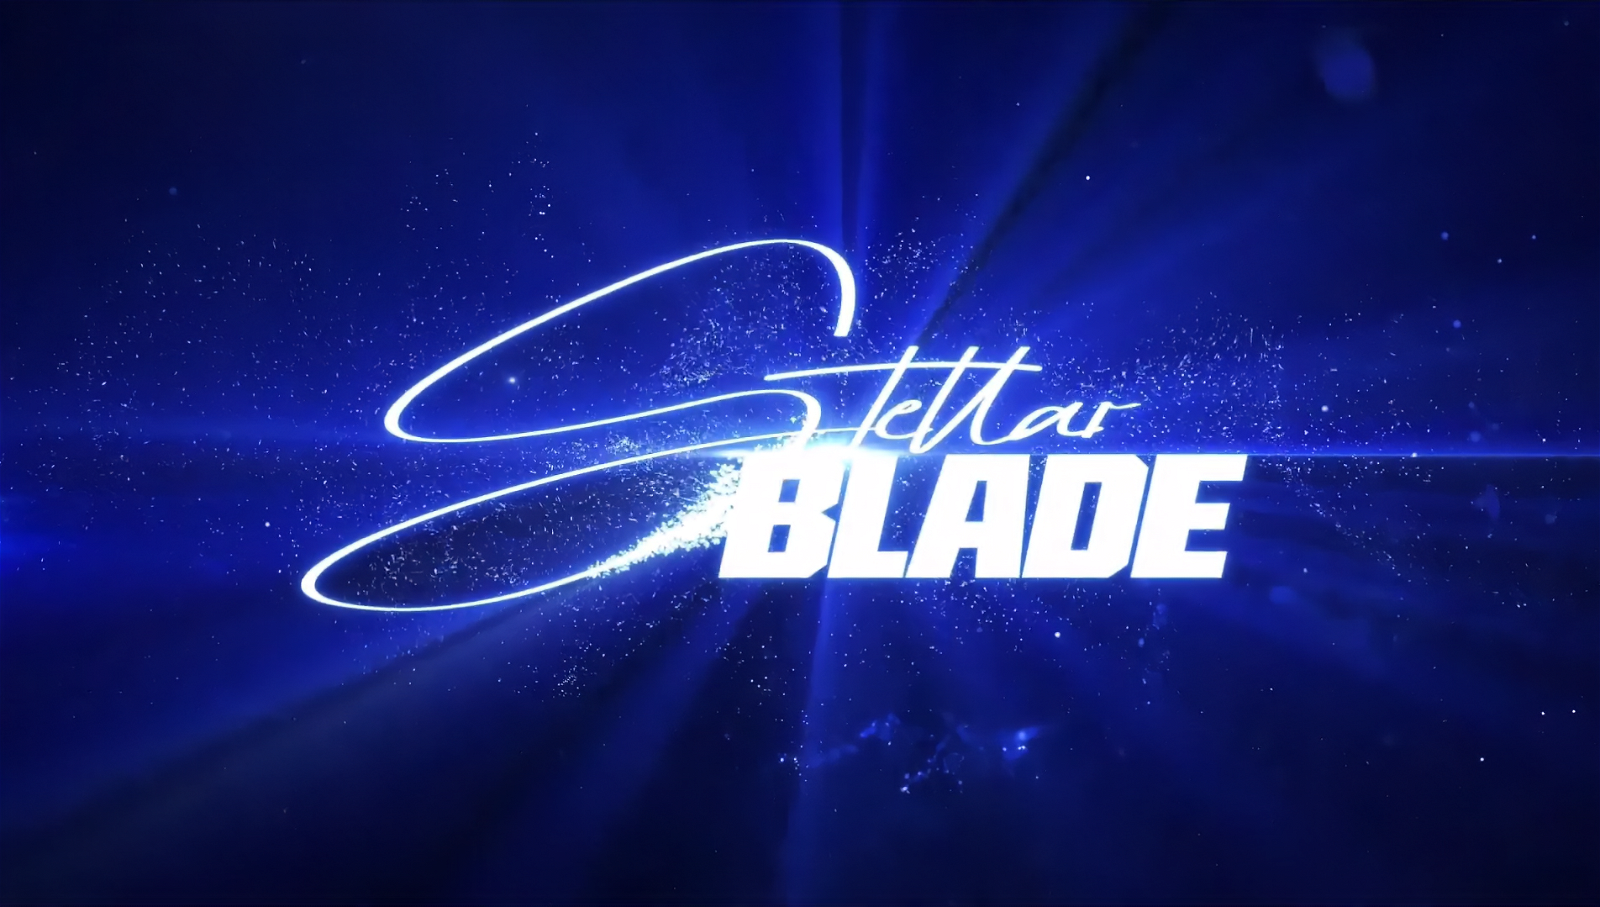 Stellar Blade will fortunately not include microtransactions in-game in order to unlock cosmetics